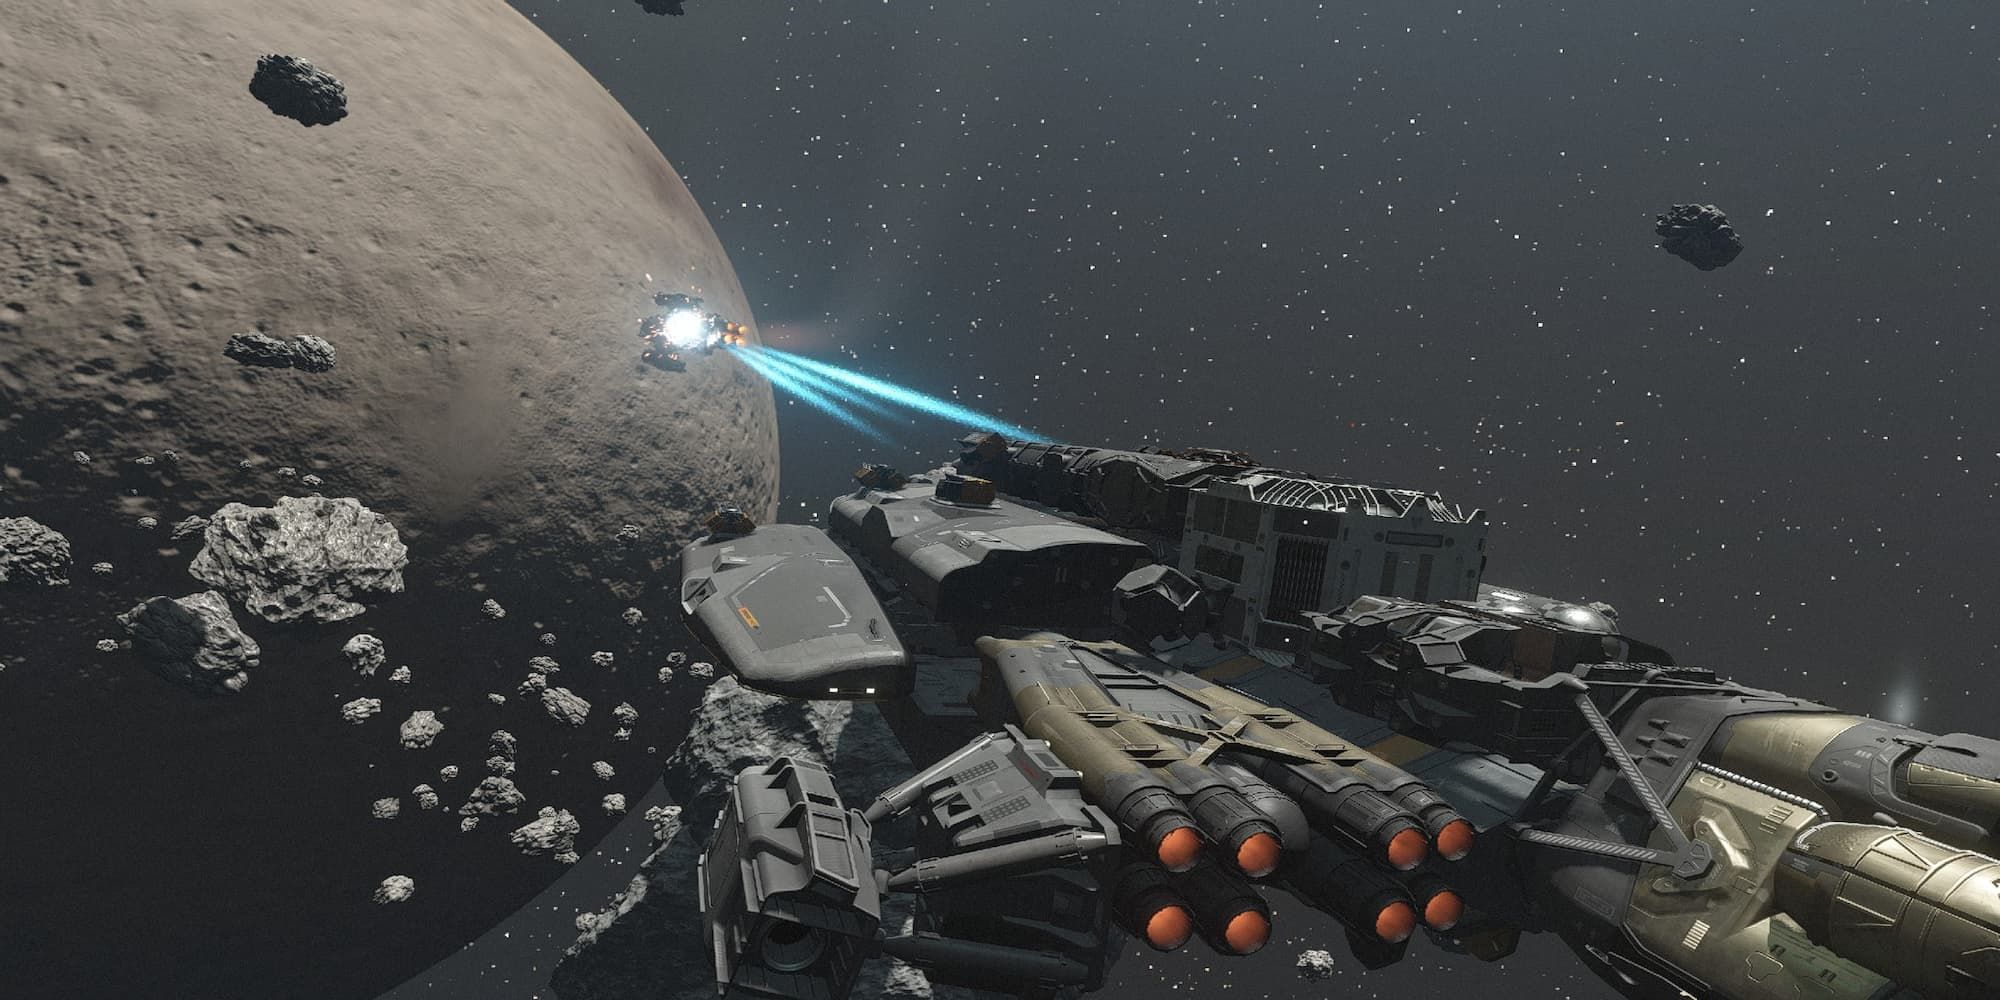 Shooting pirates with particle beams in starfield